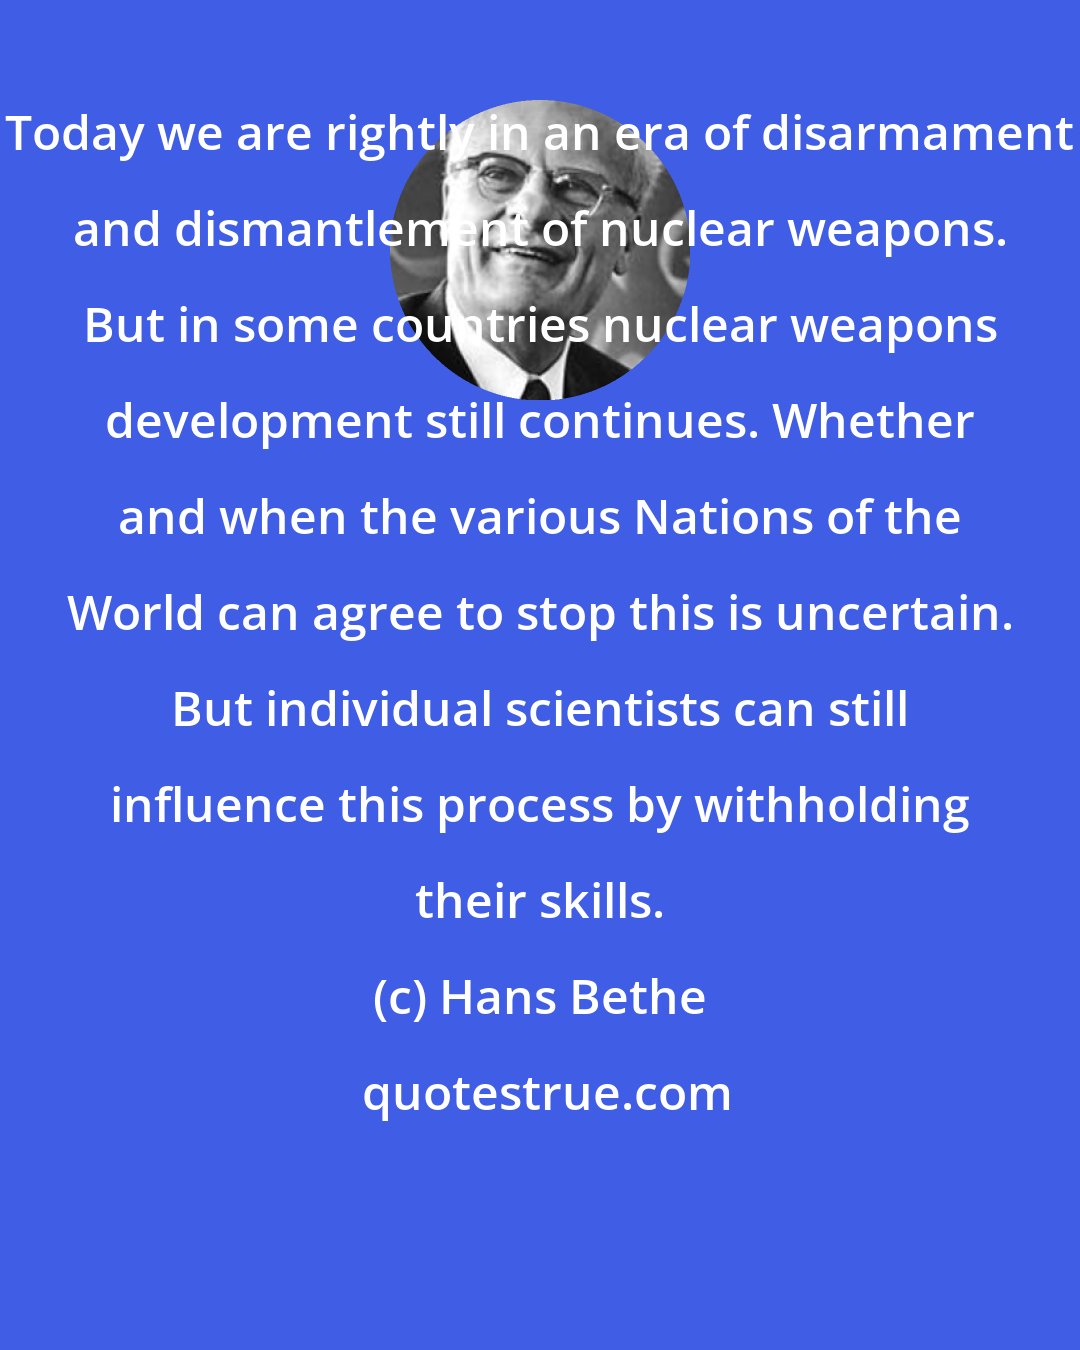 Hans Bethe: Today we are rightly in an era of disarmament and dismantlement of nuclear weapons. But in some countries nuclear weapons development still continues. Whether and when the various Nations of the World can agree to stop this is uncertain. But individual scientists can still influence this process by withholding their skills.